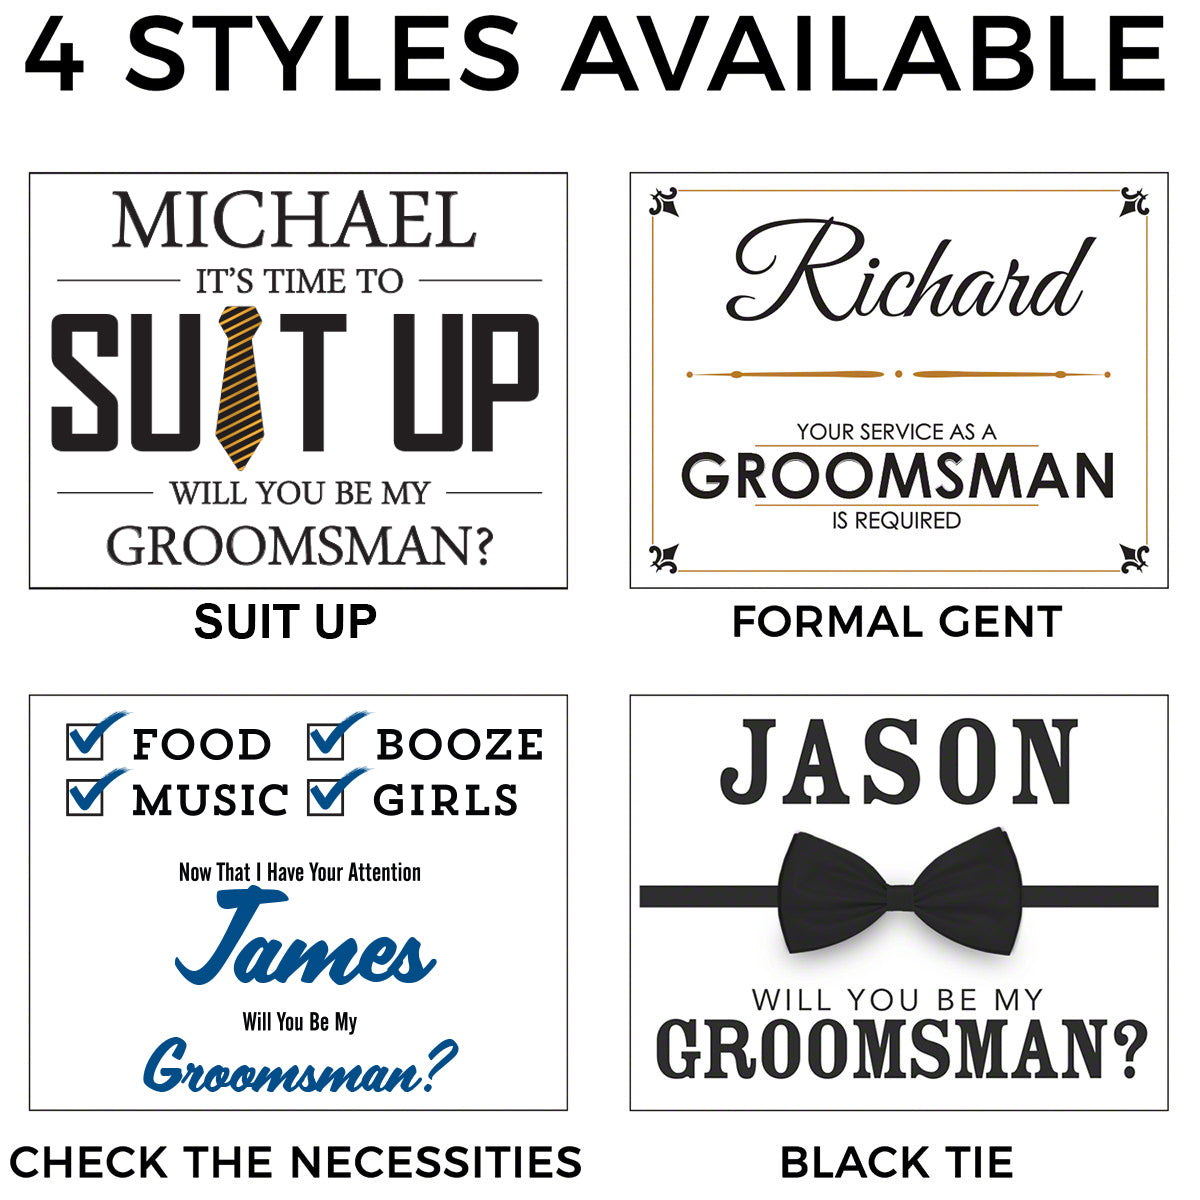 Personalized Groomsmen and Best Man Gift Box Set